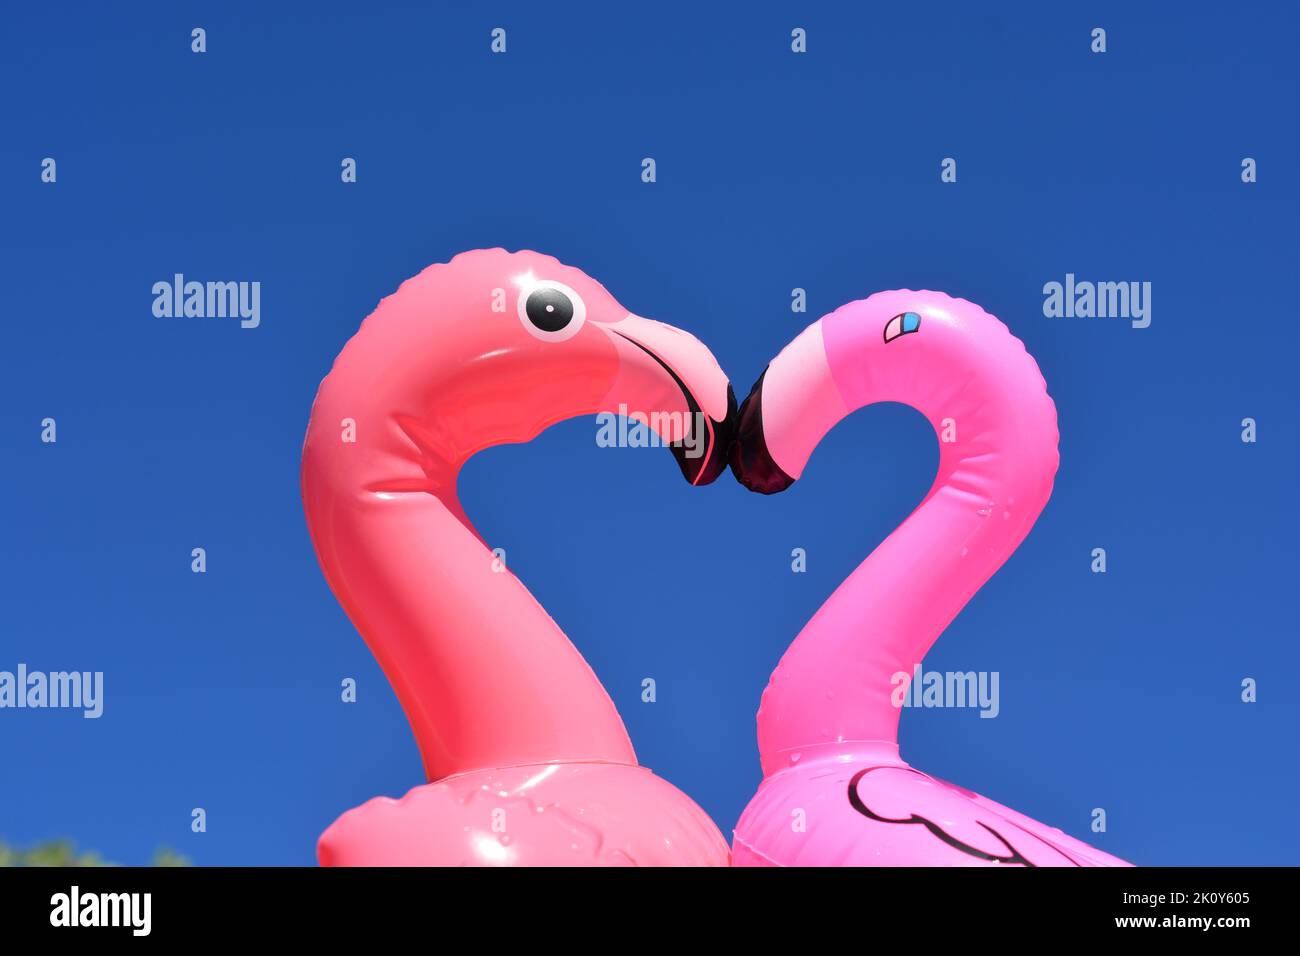 Two inflatable plastic flamingoes making a love heart shape against blue sky Stock Photo